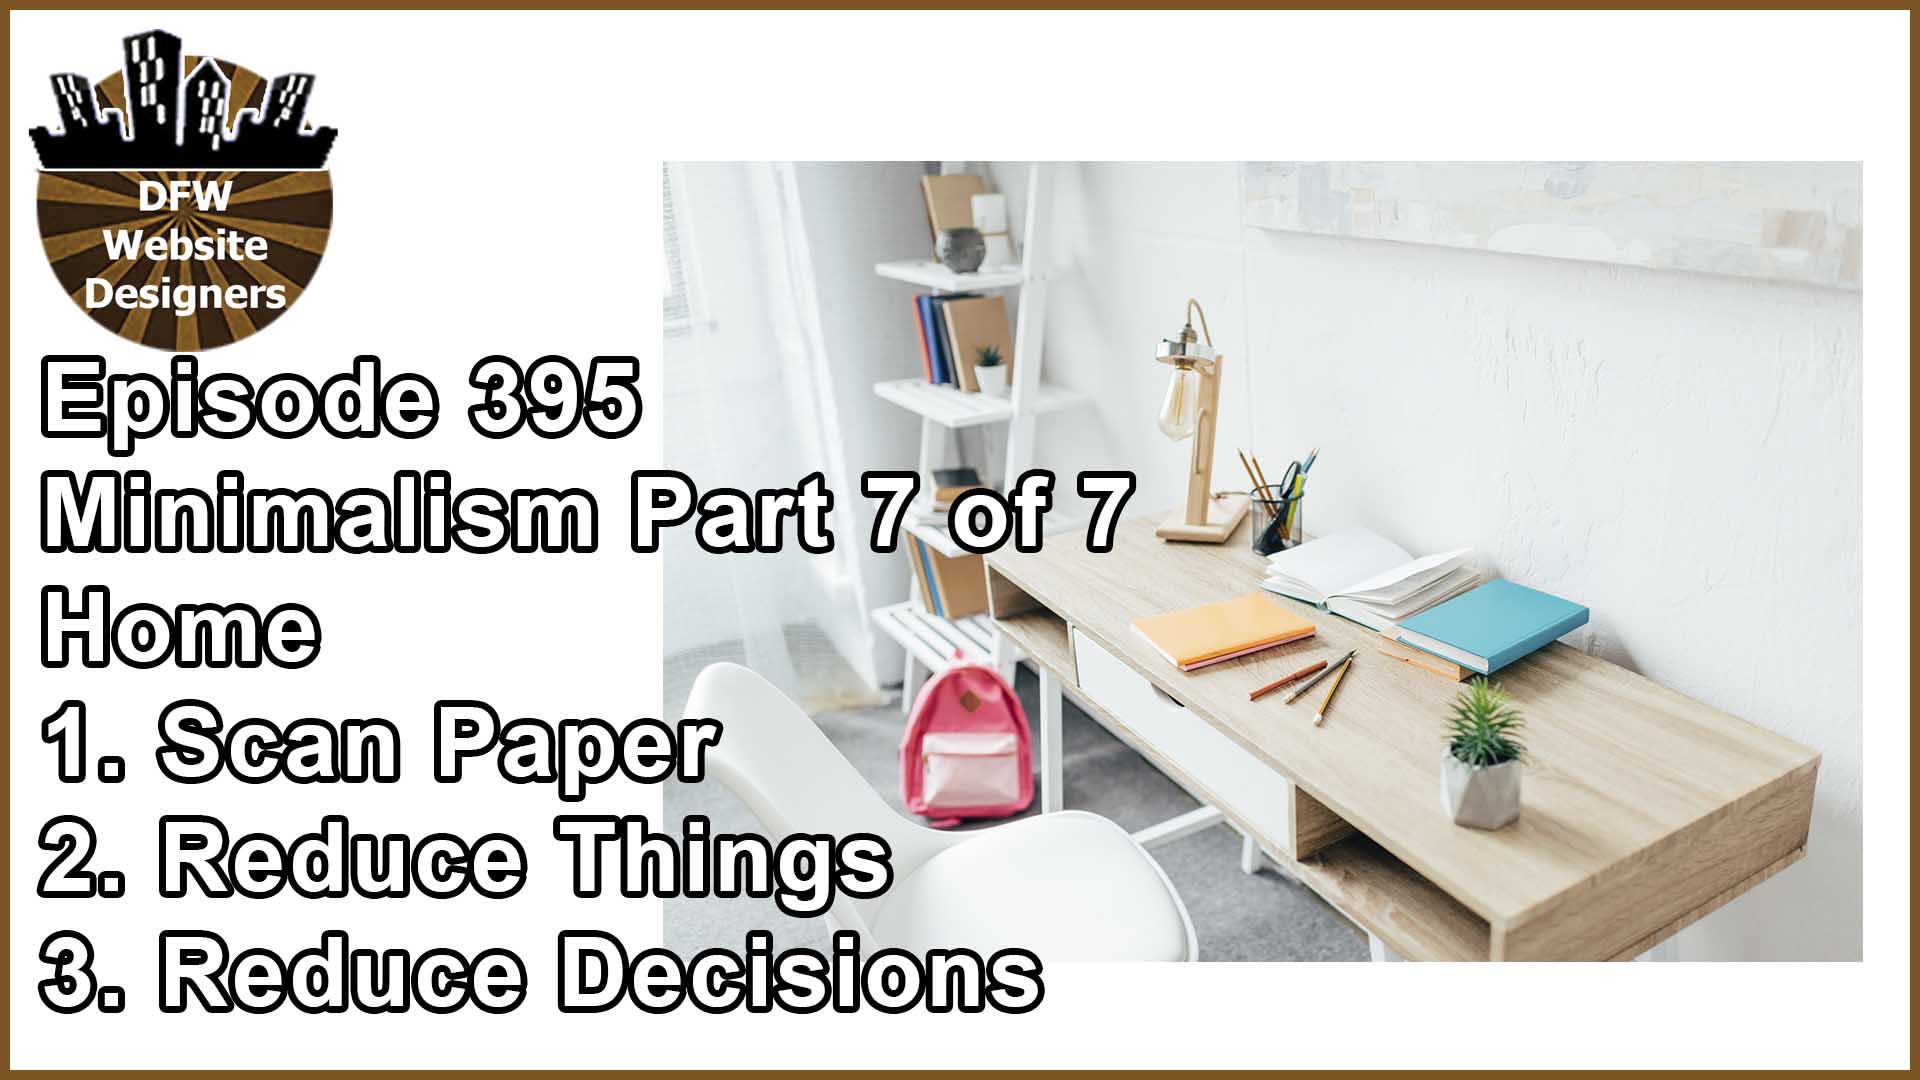 Episode 395 Minimalist Pt7 Home: Scan Papers, Reduce Things, Reduce Decisions